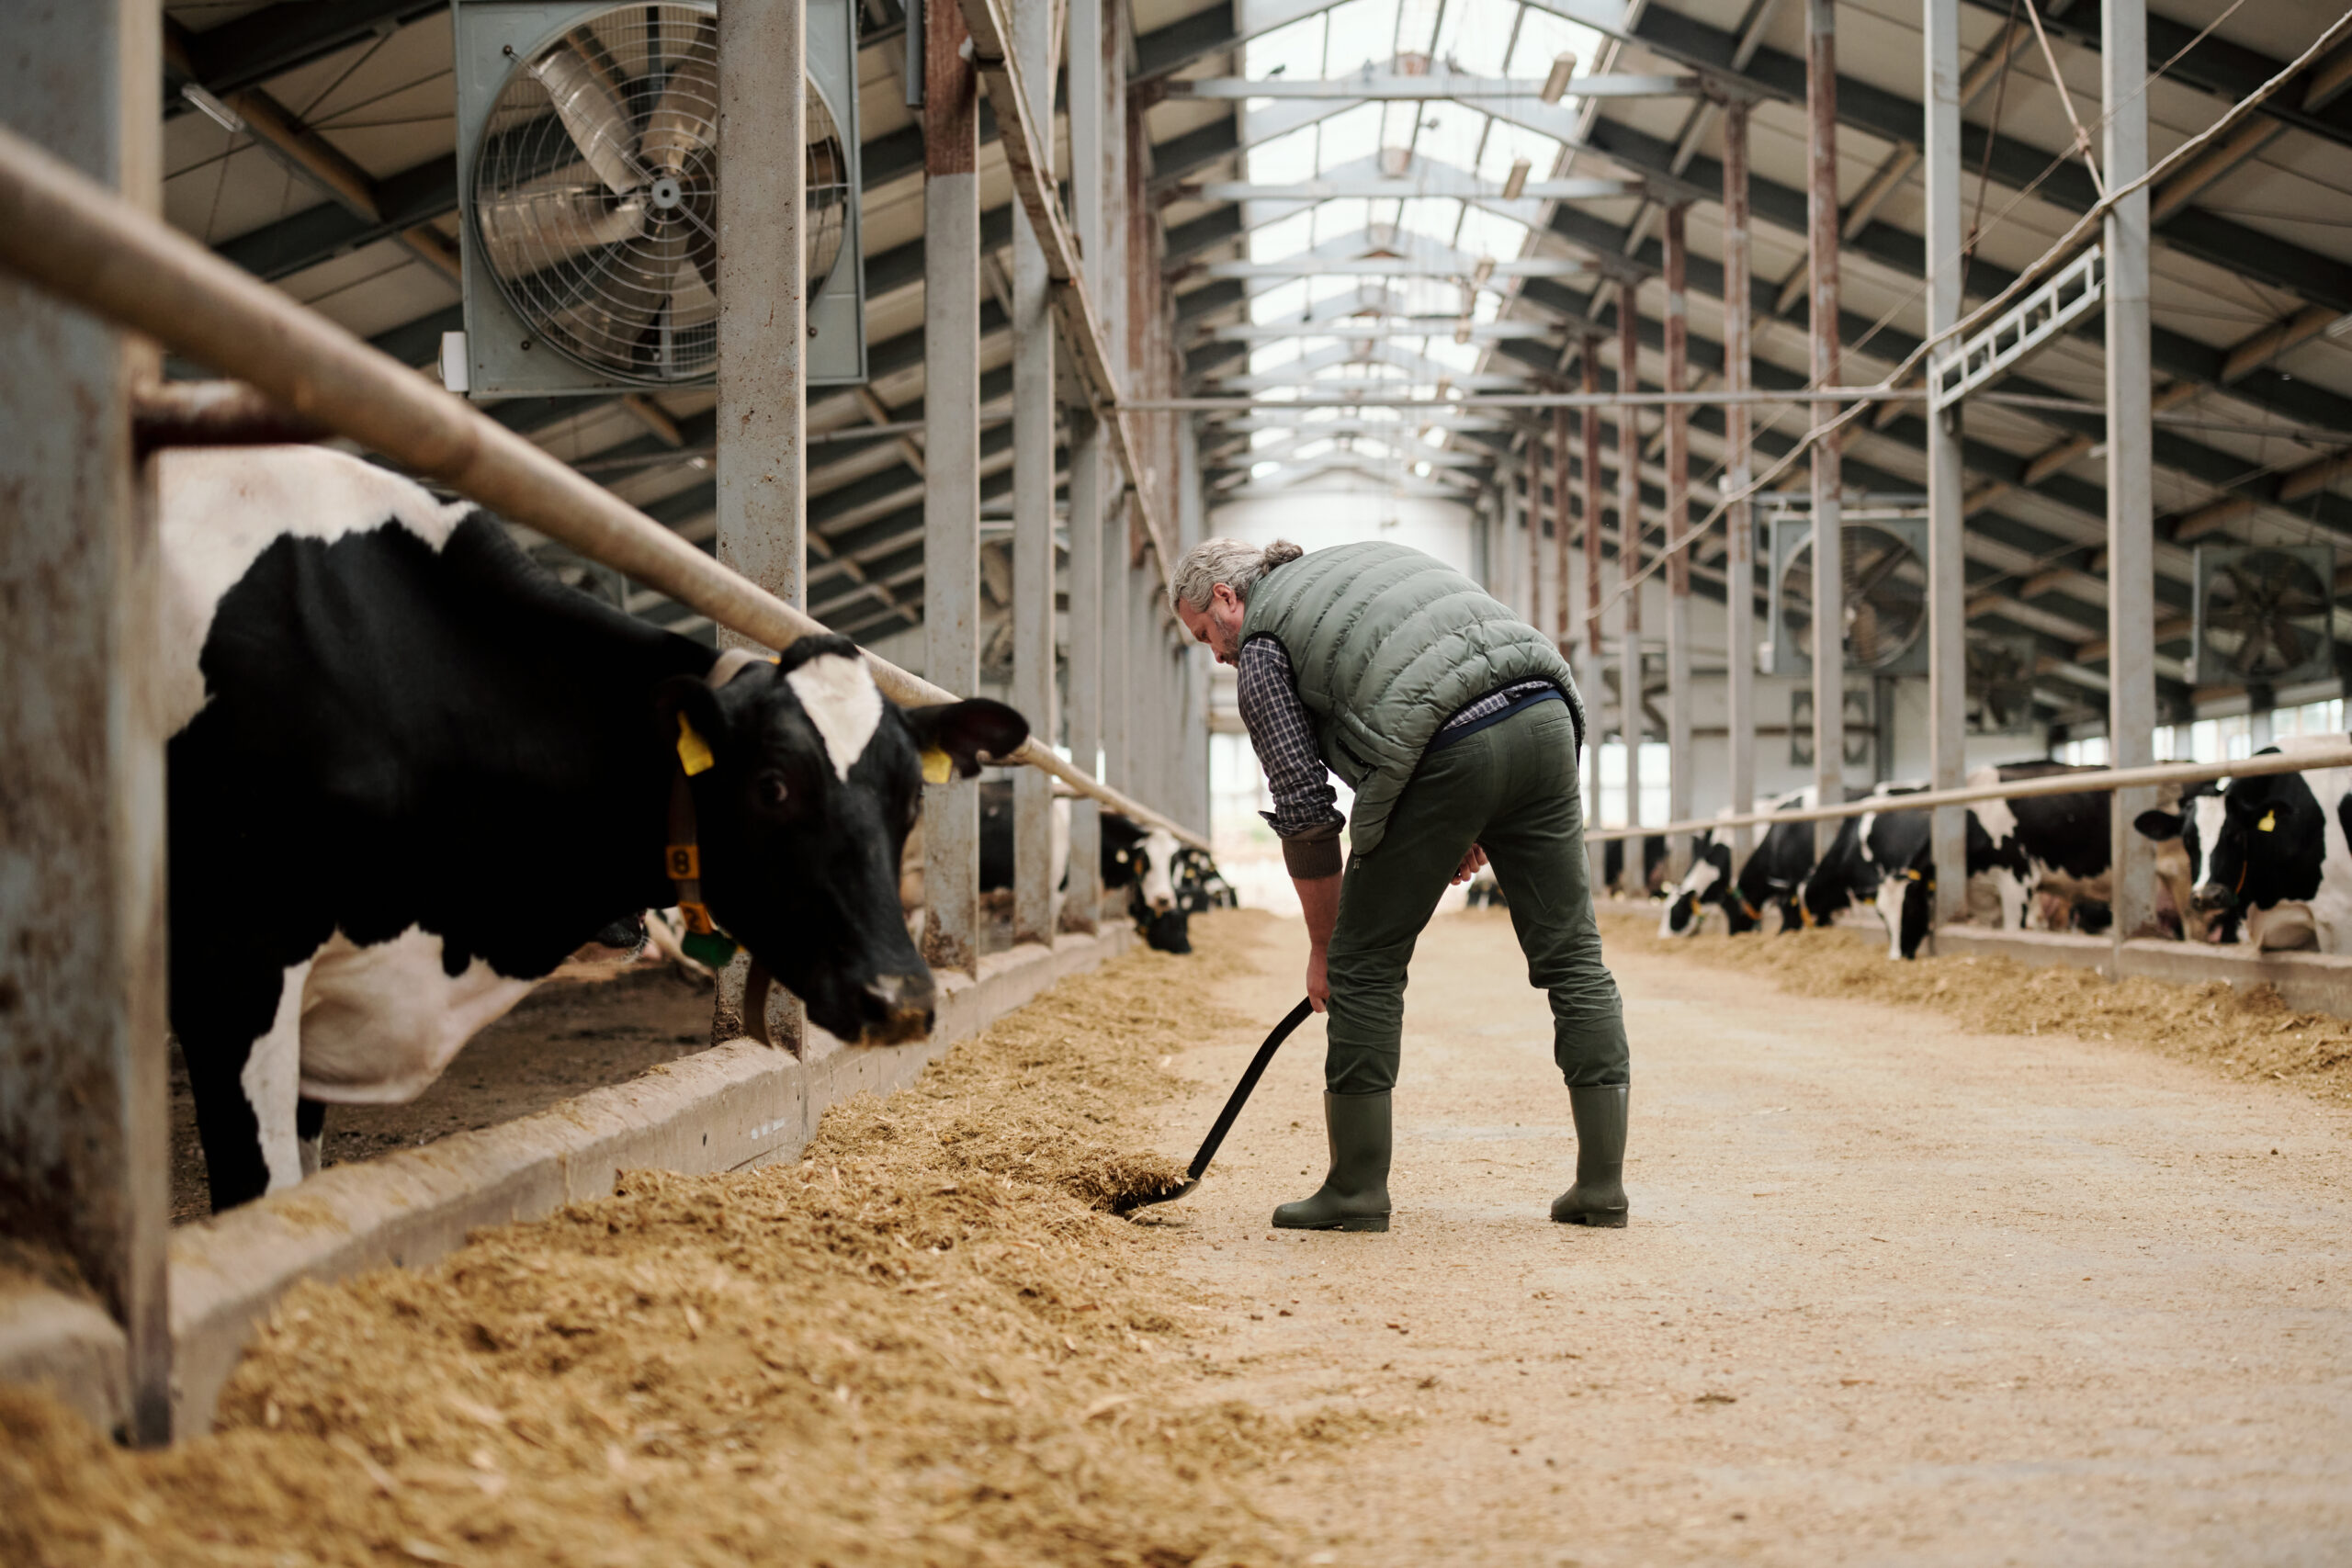 man shoveling animal feed in front of a diary cow in a barn